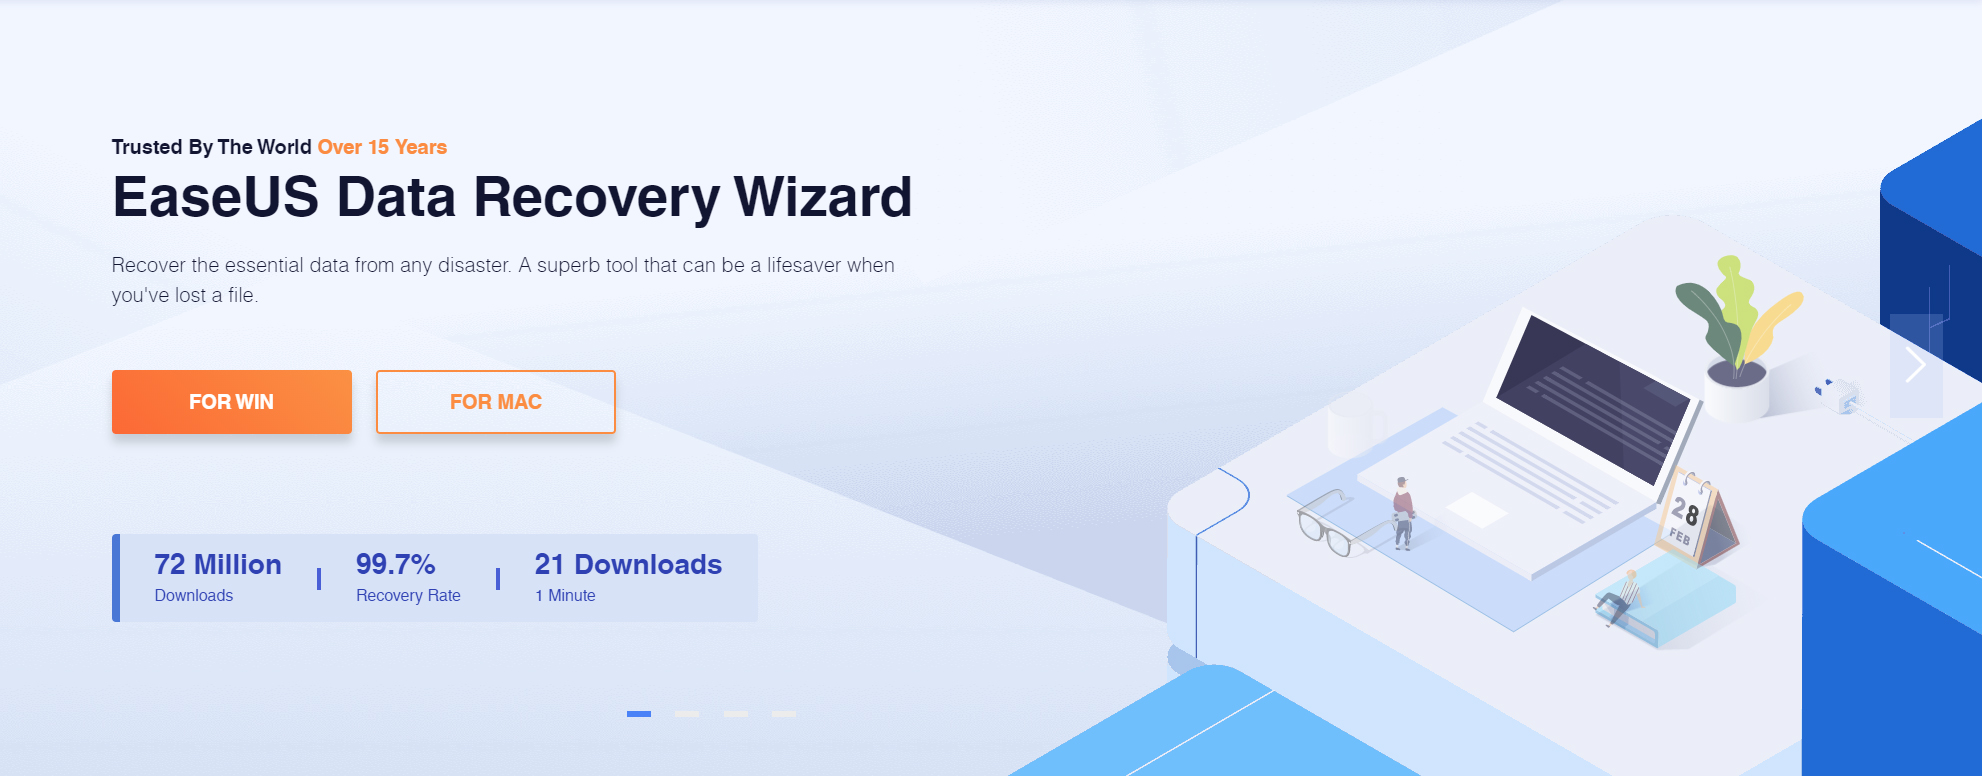 Ease-US data recovery wizard